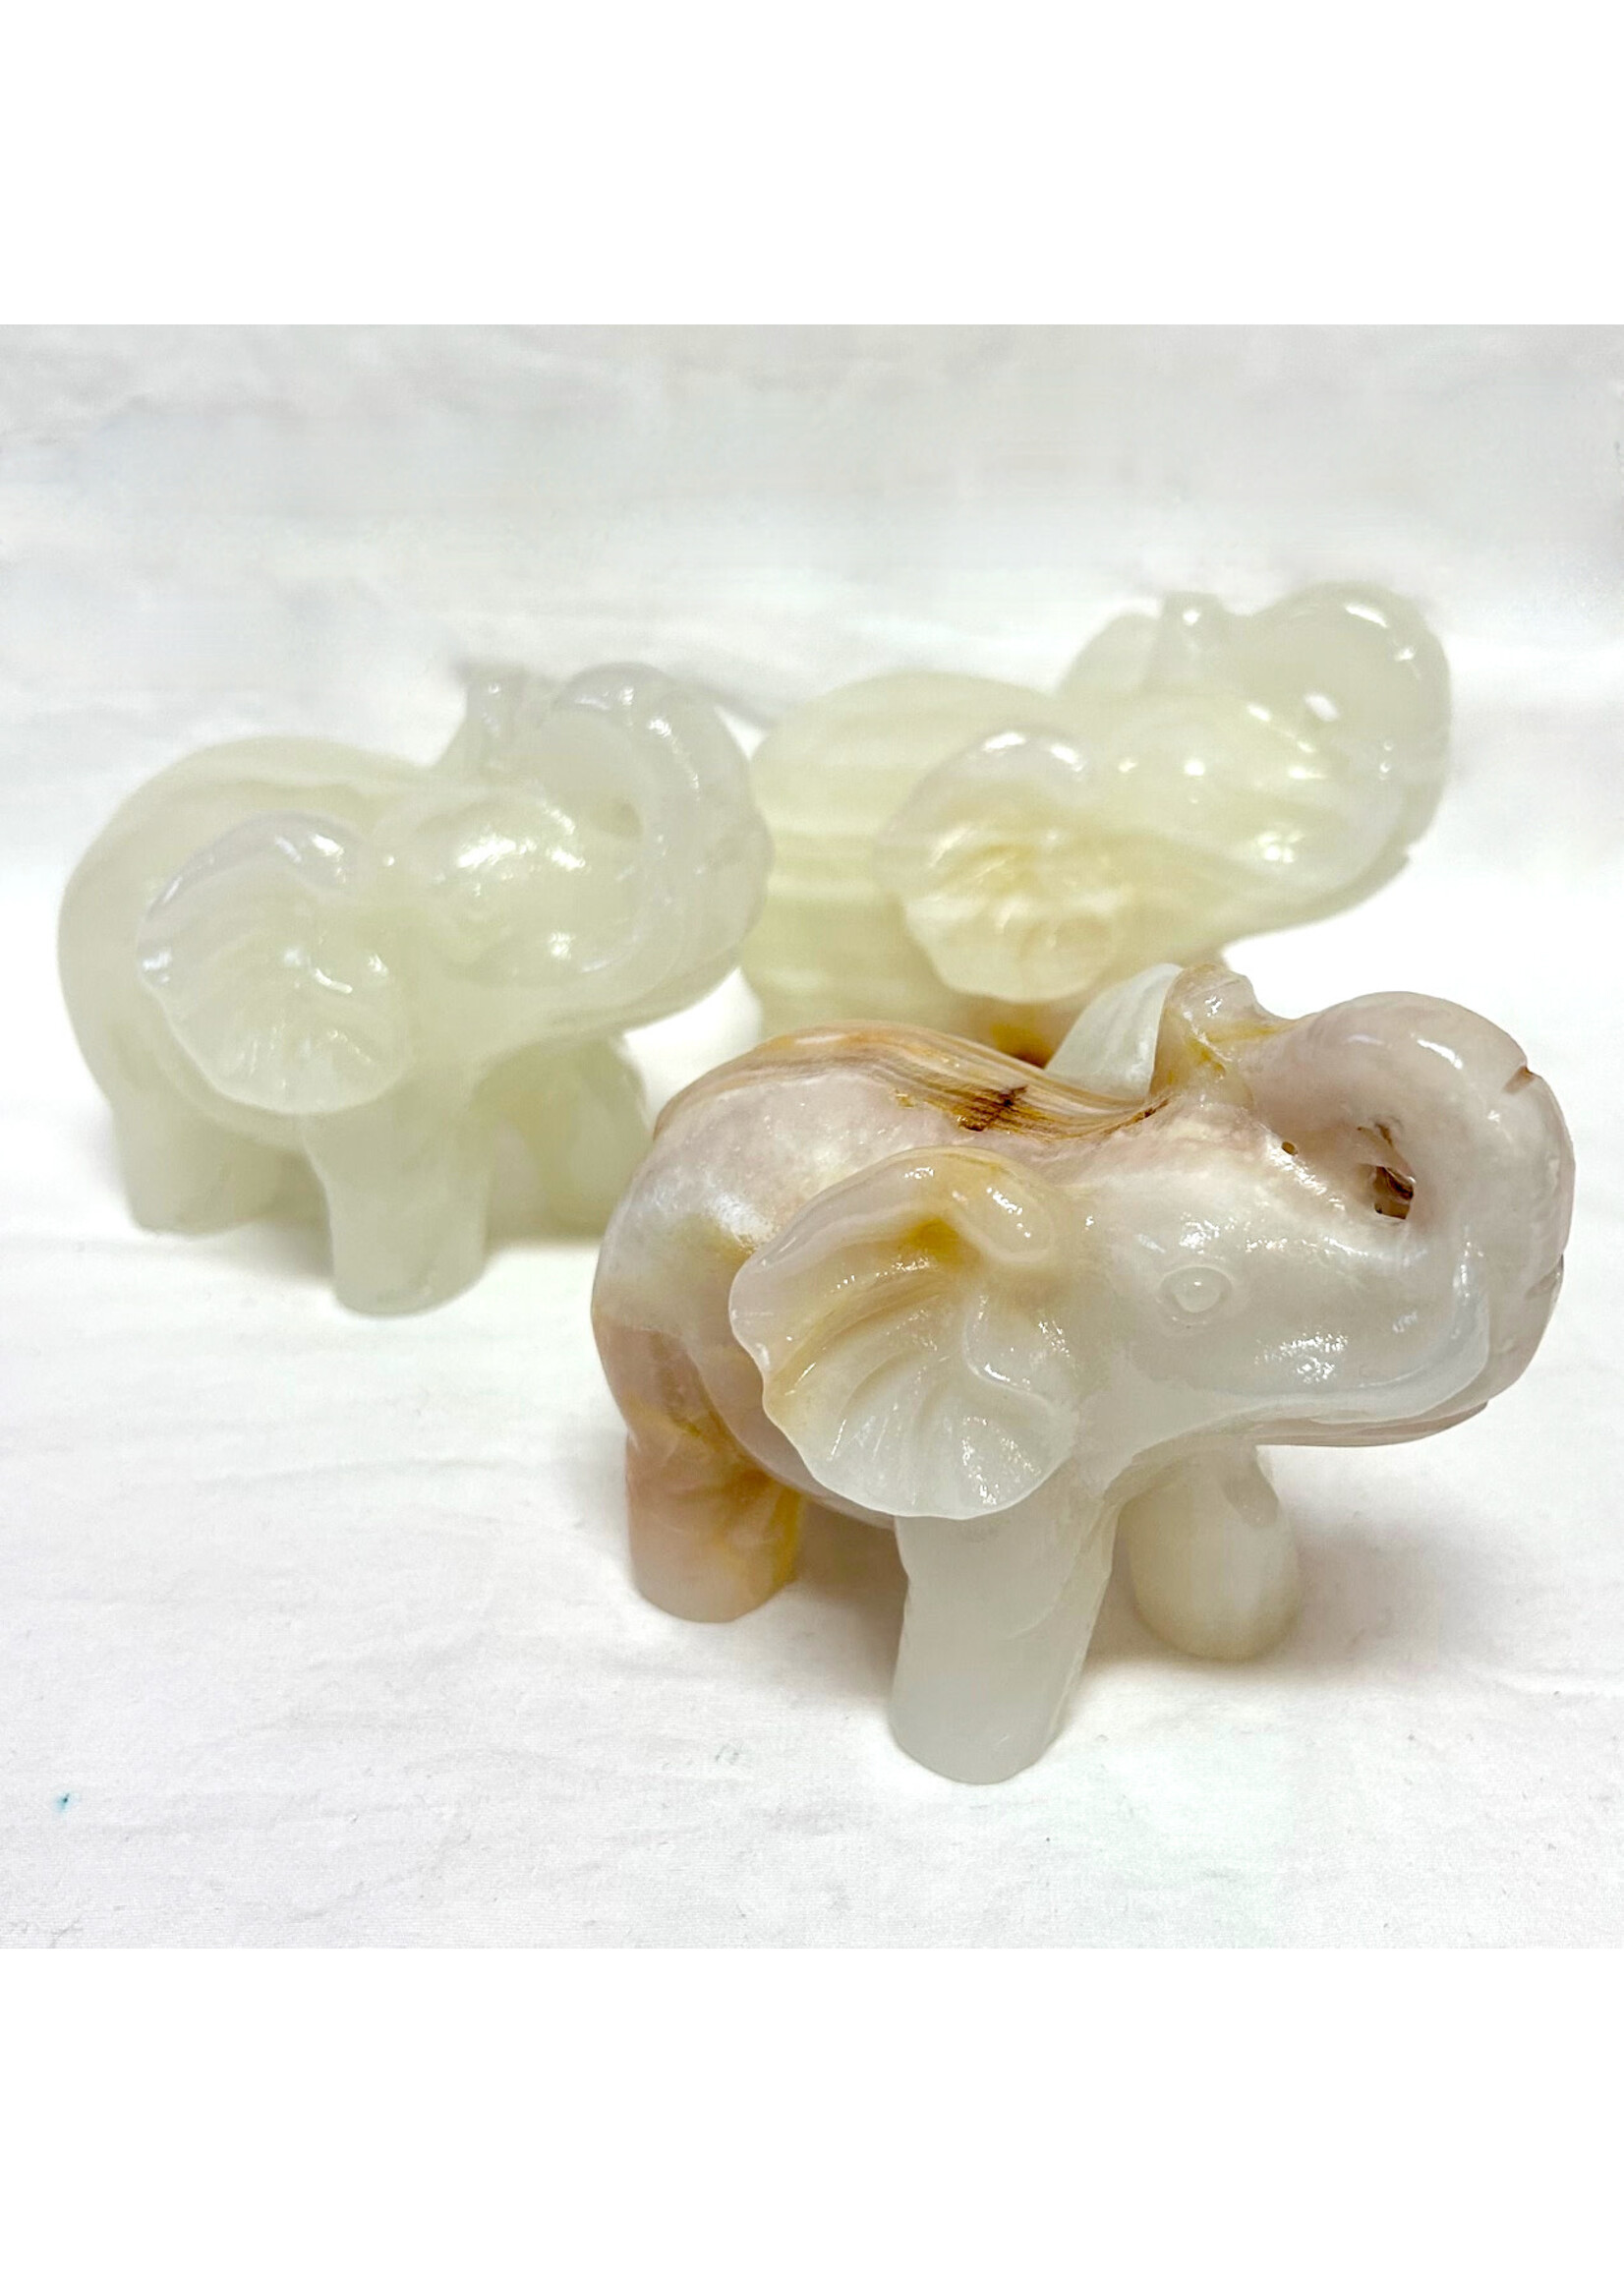 Onyx Elephants for nurturing and compassion